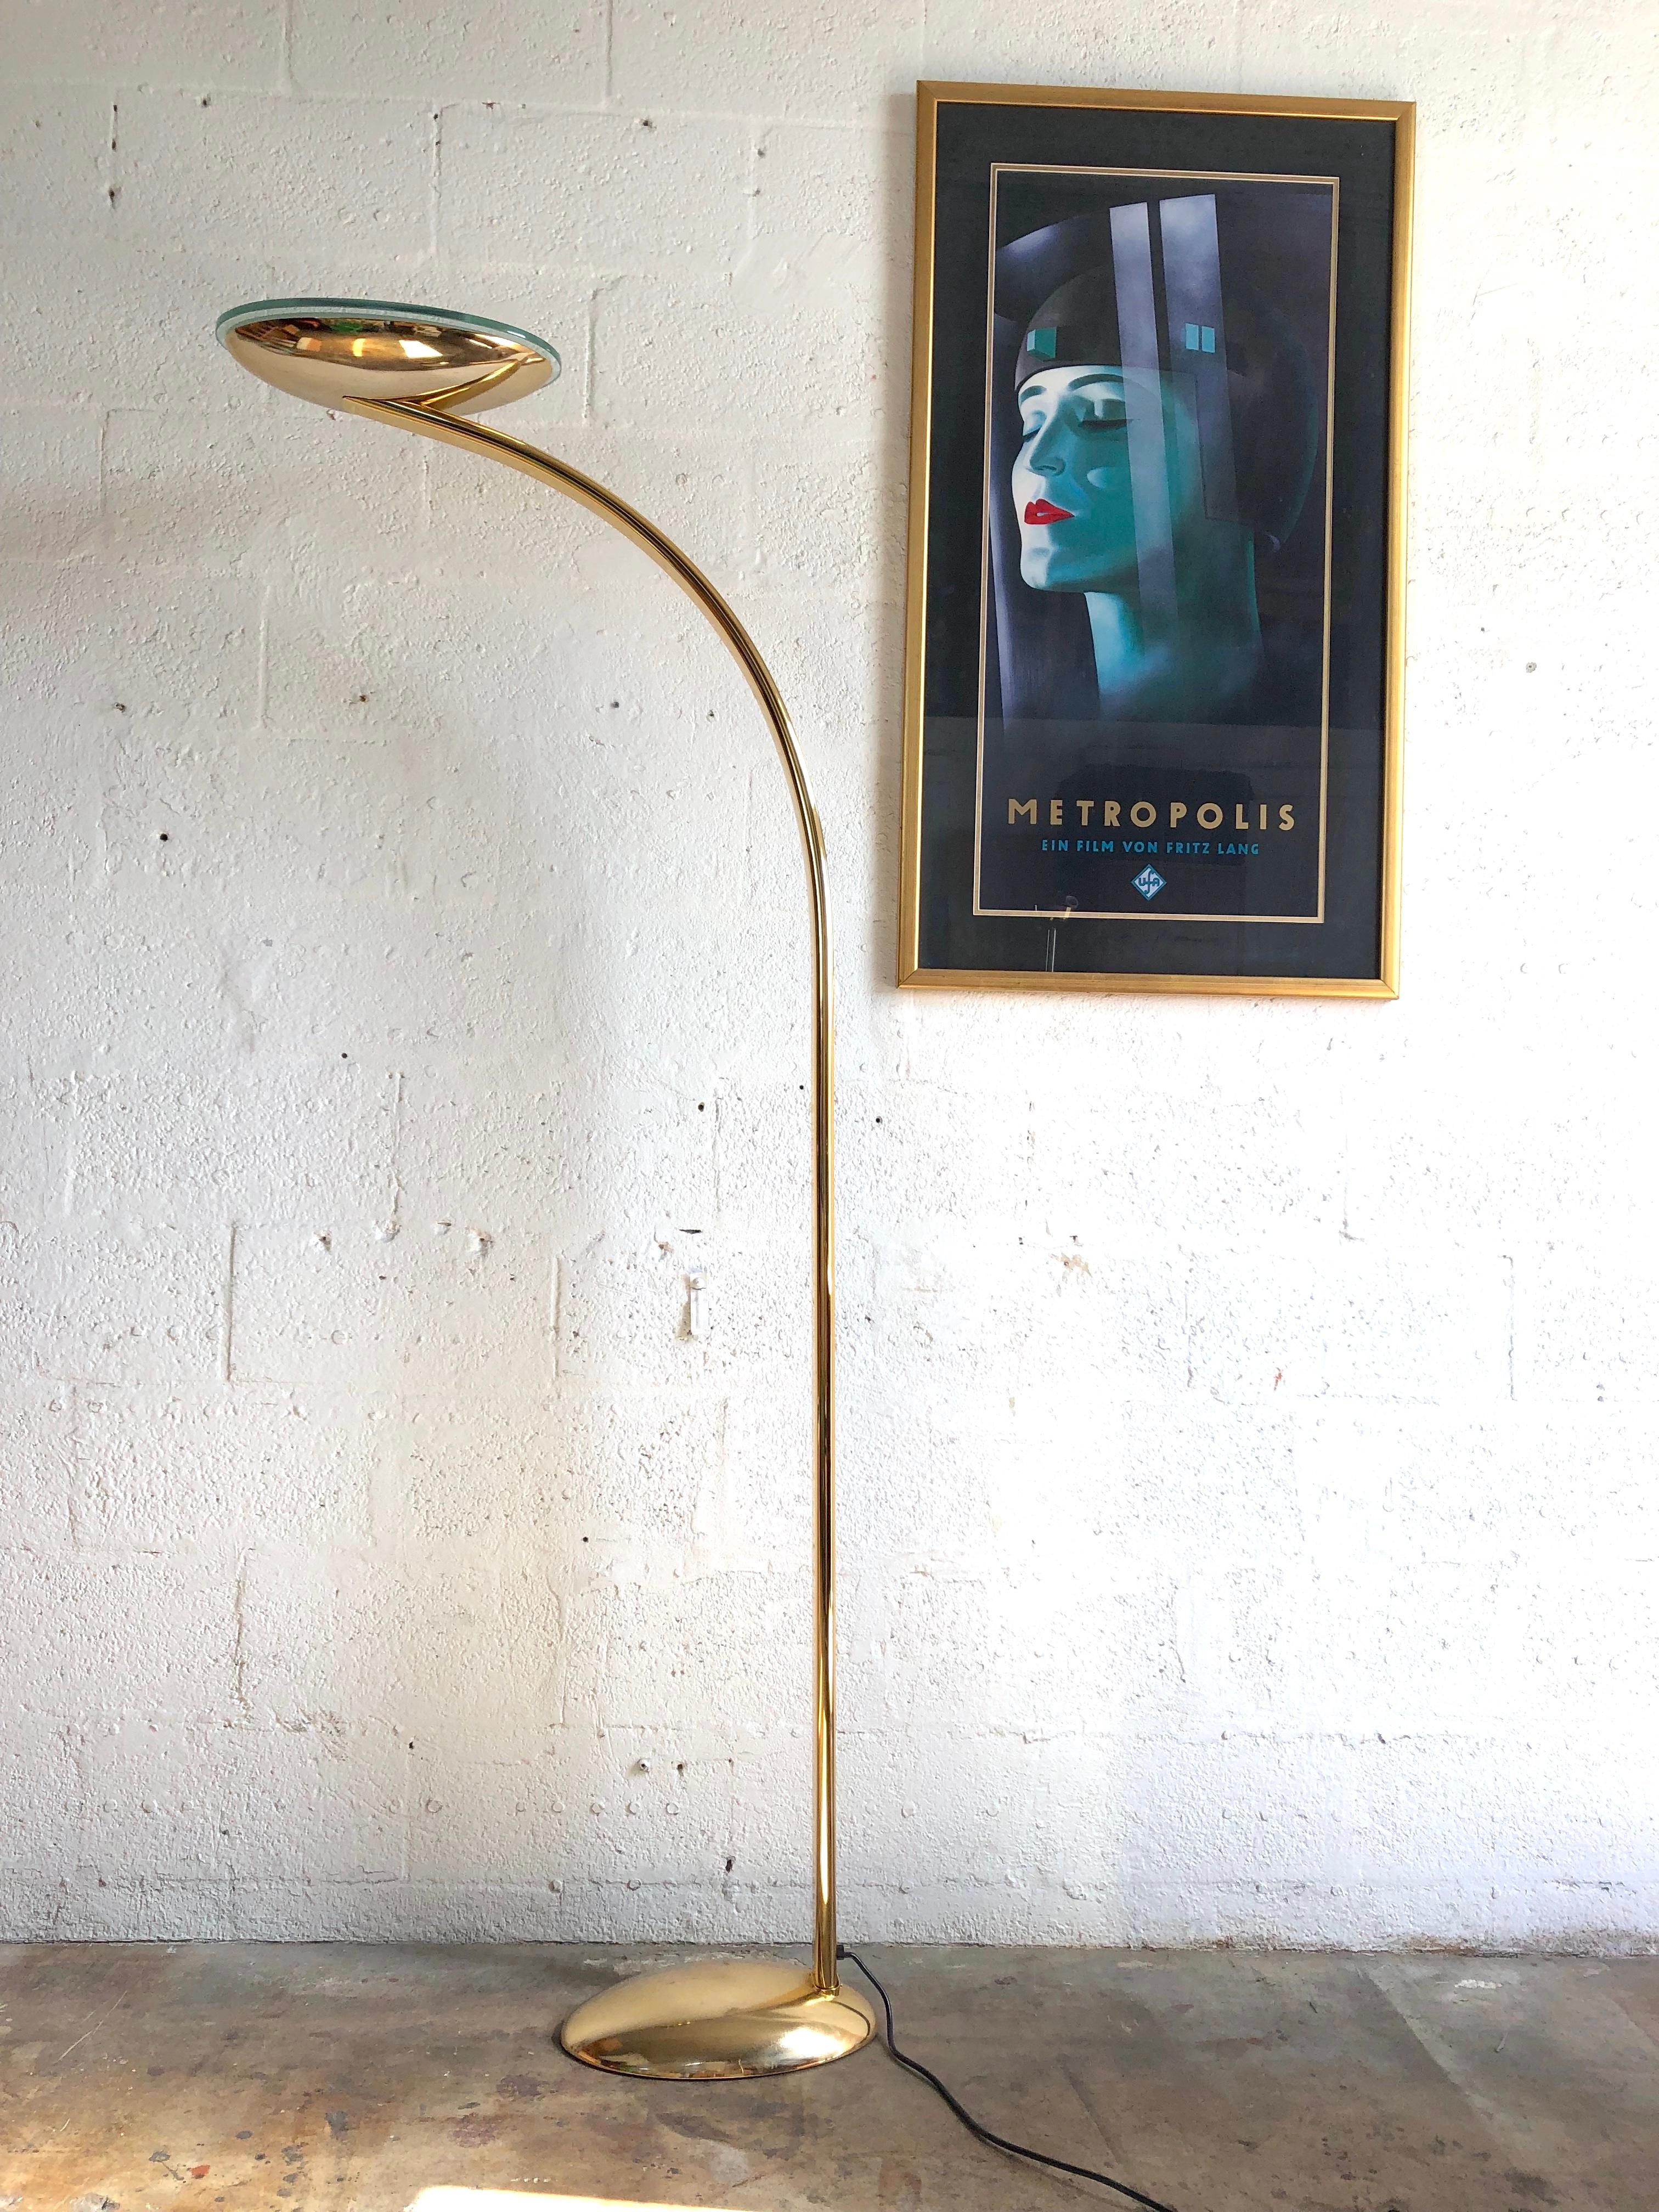 Post Modern Art Deco revival halogen brass arched torchiere floor lamp. Circa mid-1980s
Features a stunning futuristic Art Deco Inspired Design, a reasonable large size, a reverse oval dome with teal tempered glass trims, a flat brass pleated